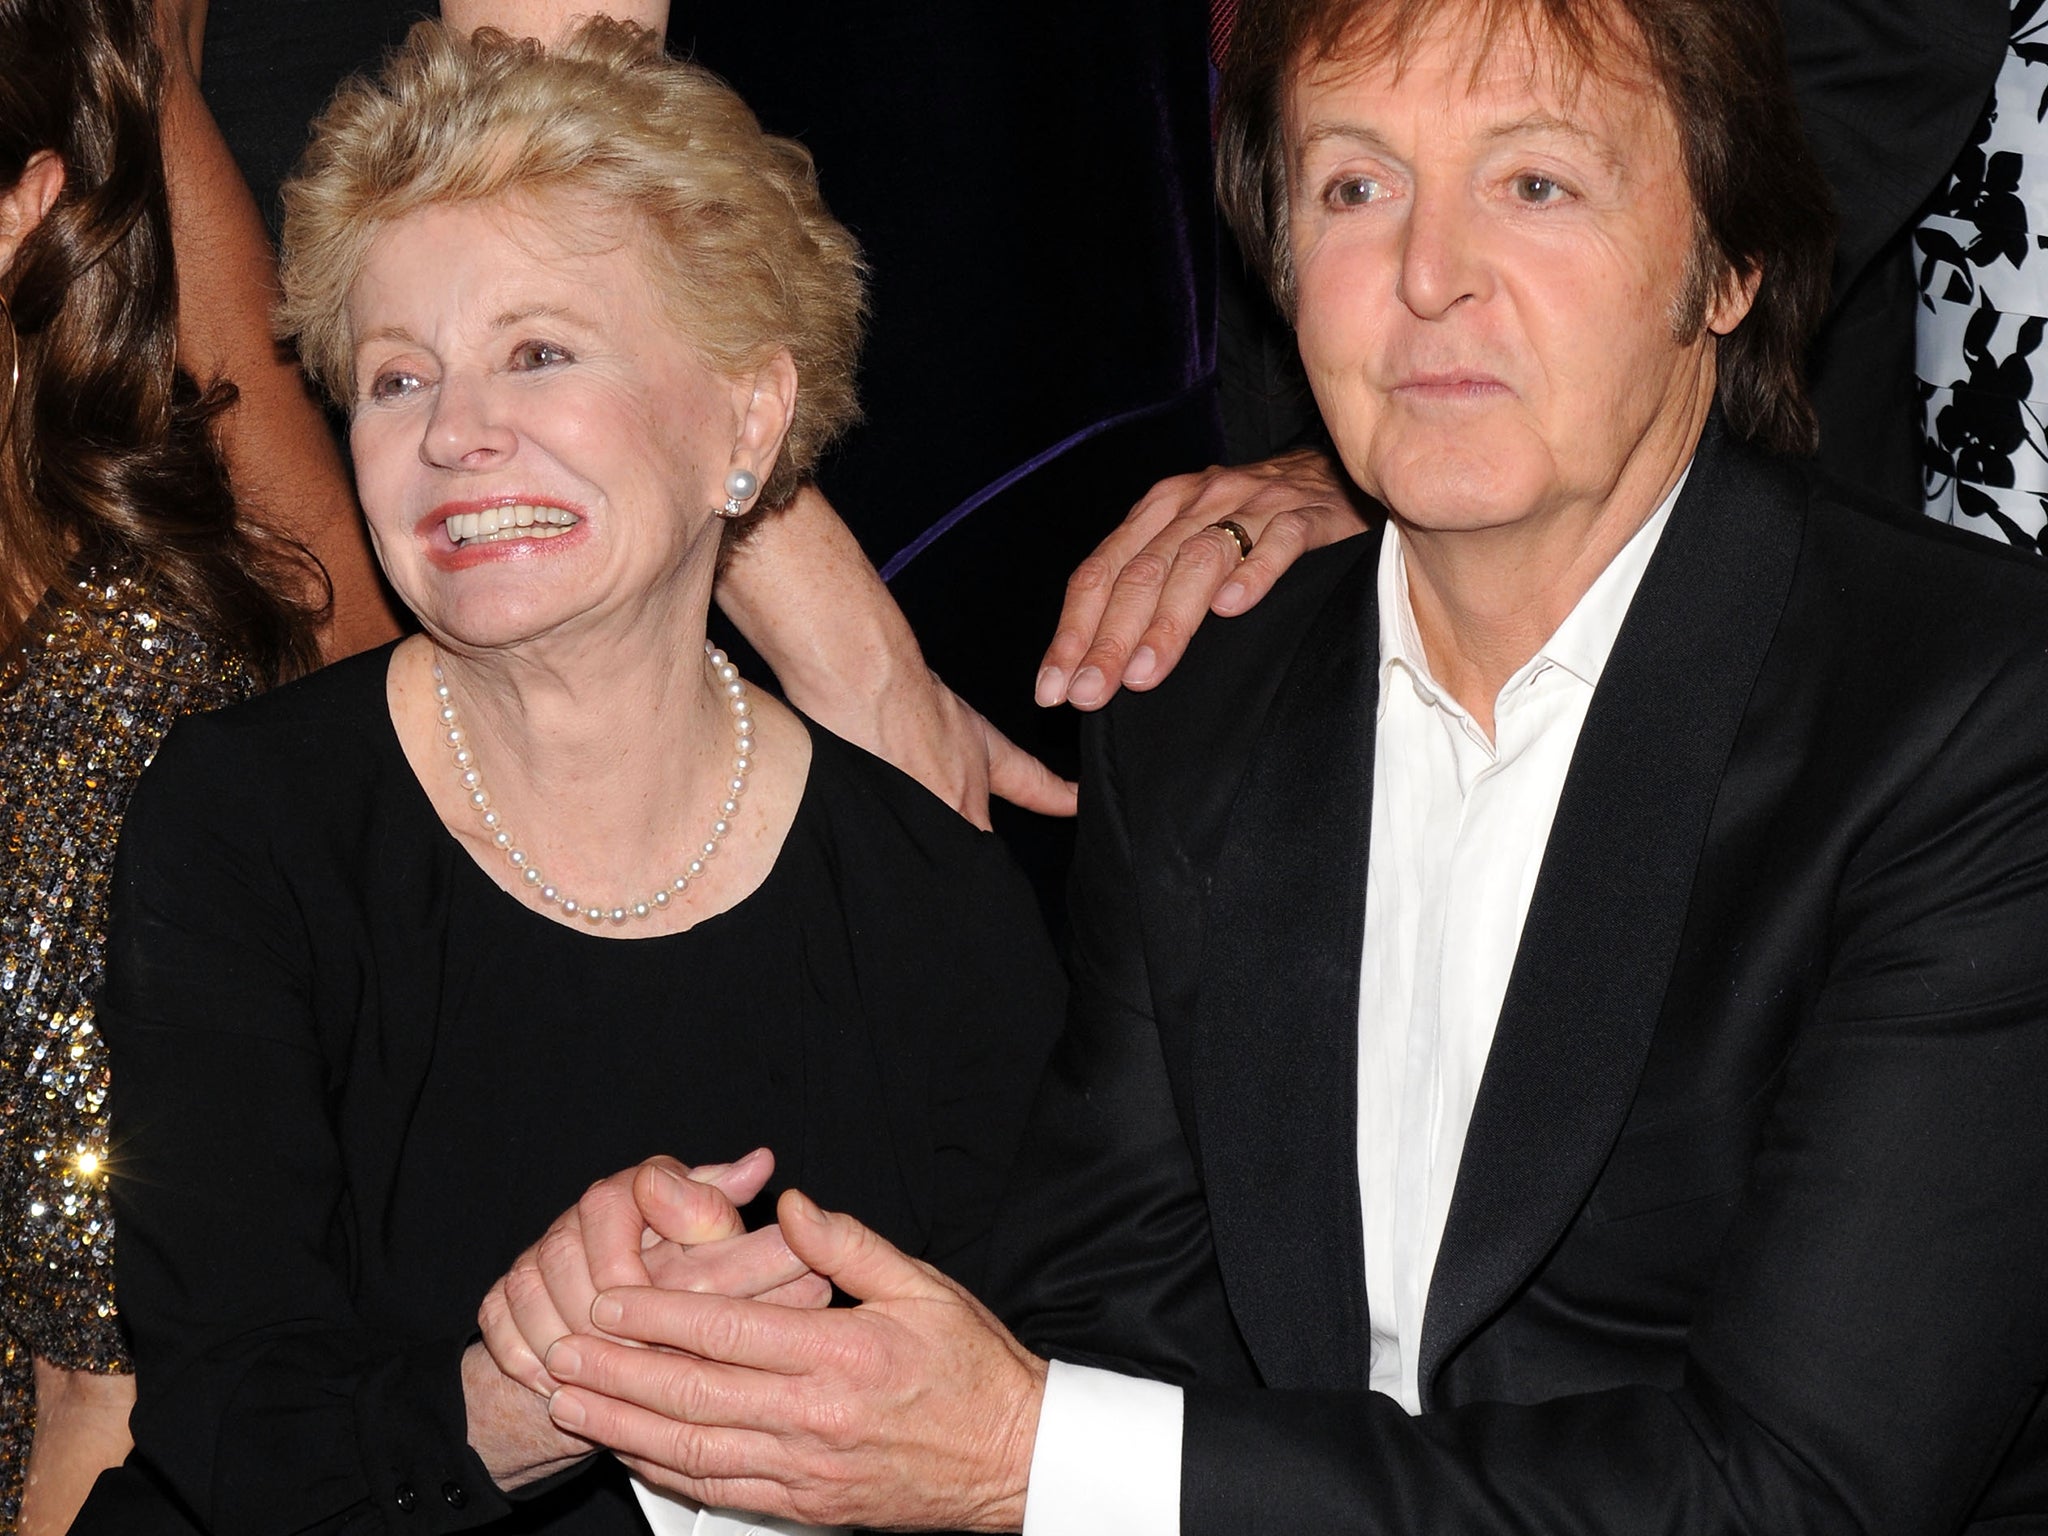 Jo Sullivan Loesser and Sir Paul McCartney, who owns the rights to her husband's music, although she retained creative control over the production of his plays